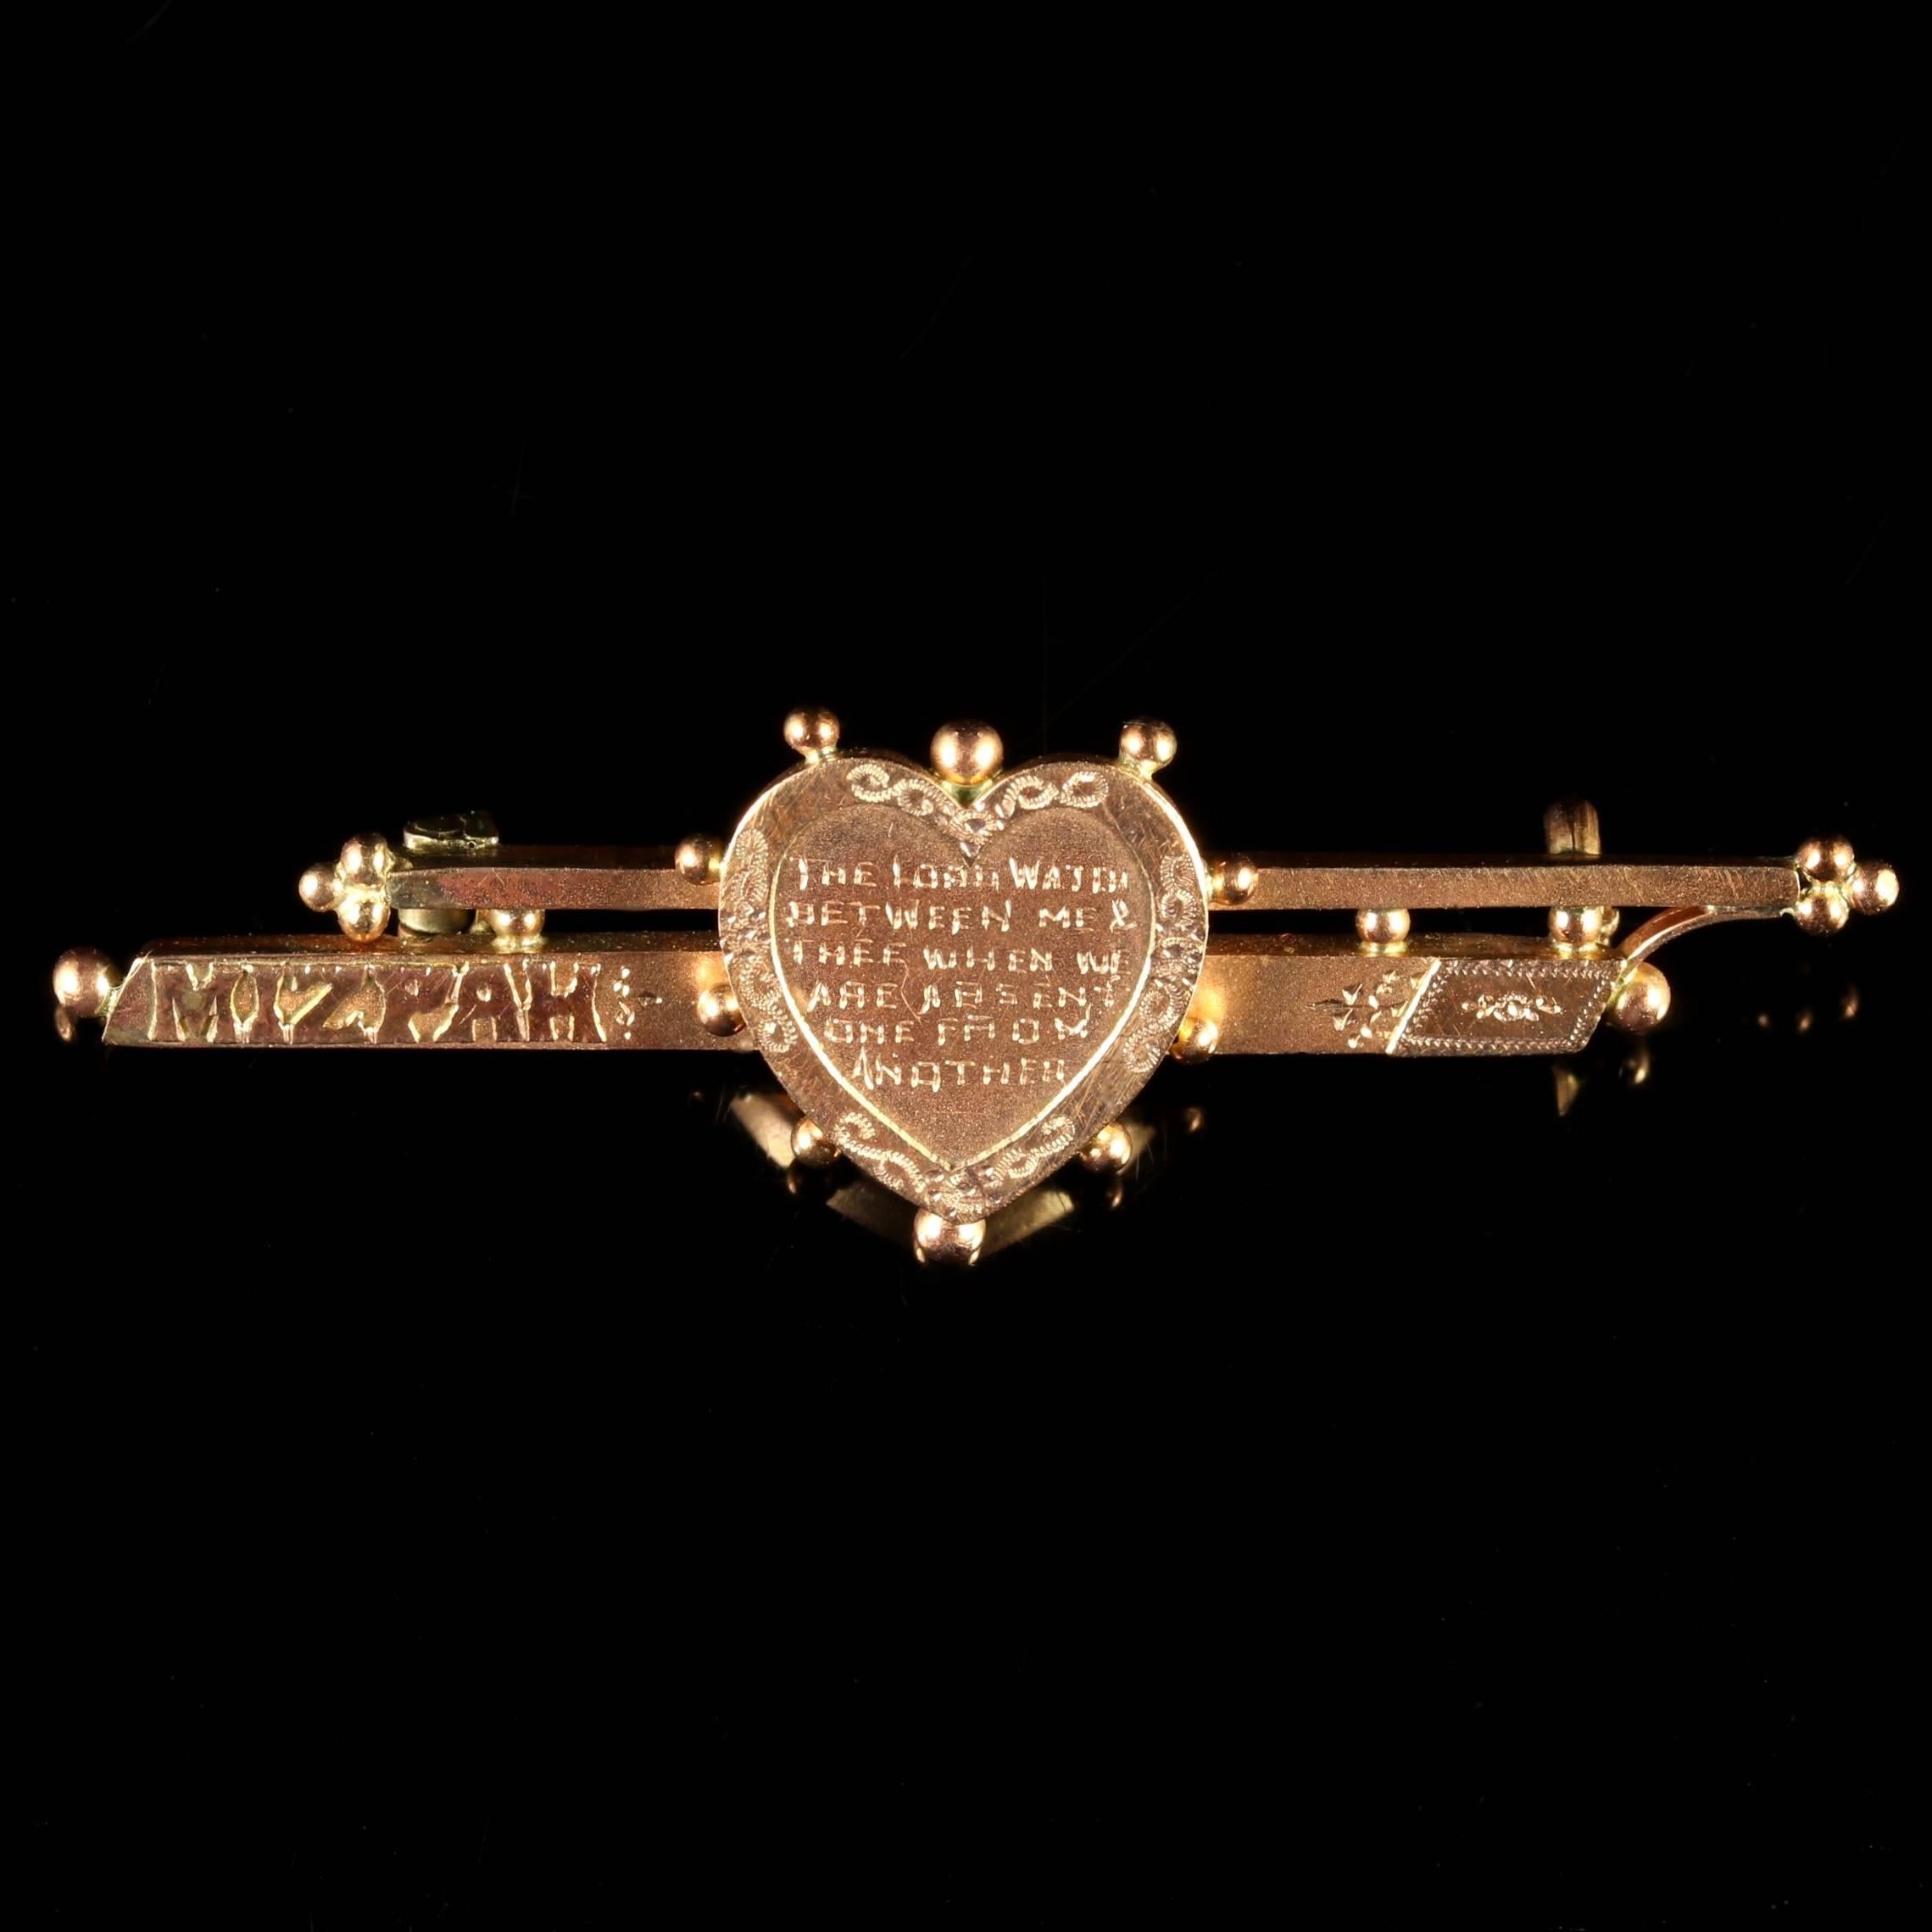 This fabulous Victorian 9ct Gold Mizpah Brooch is Circa 1880.

This Brooch boasts superb craftsmanship with beautiful engraving all round.

Mizpah is a name from the Bible. As Laban said, The Lord watch between you and me, when we are absent one